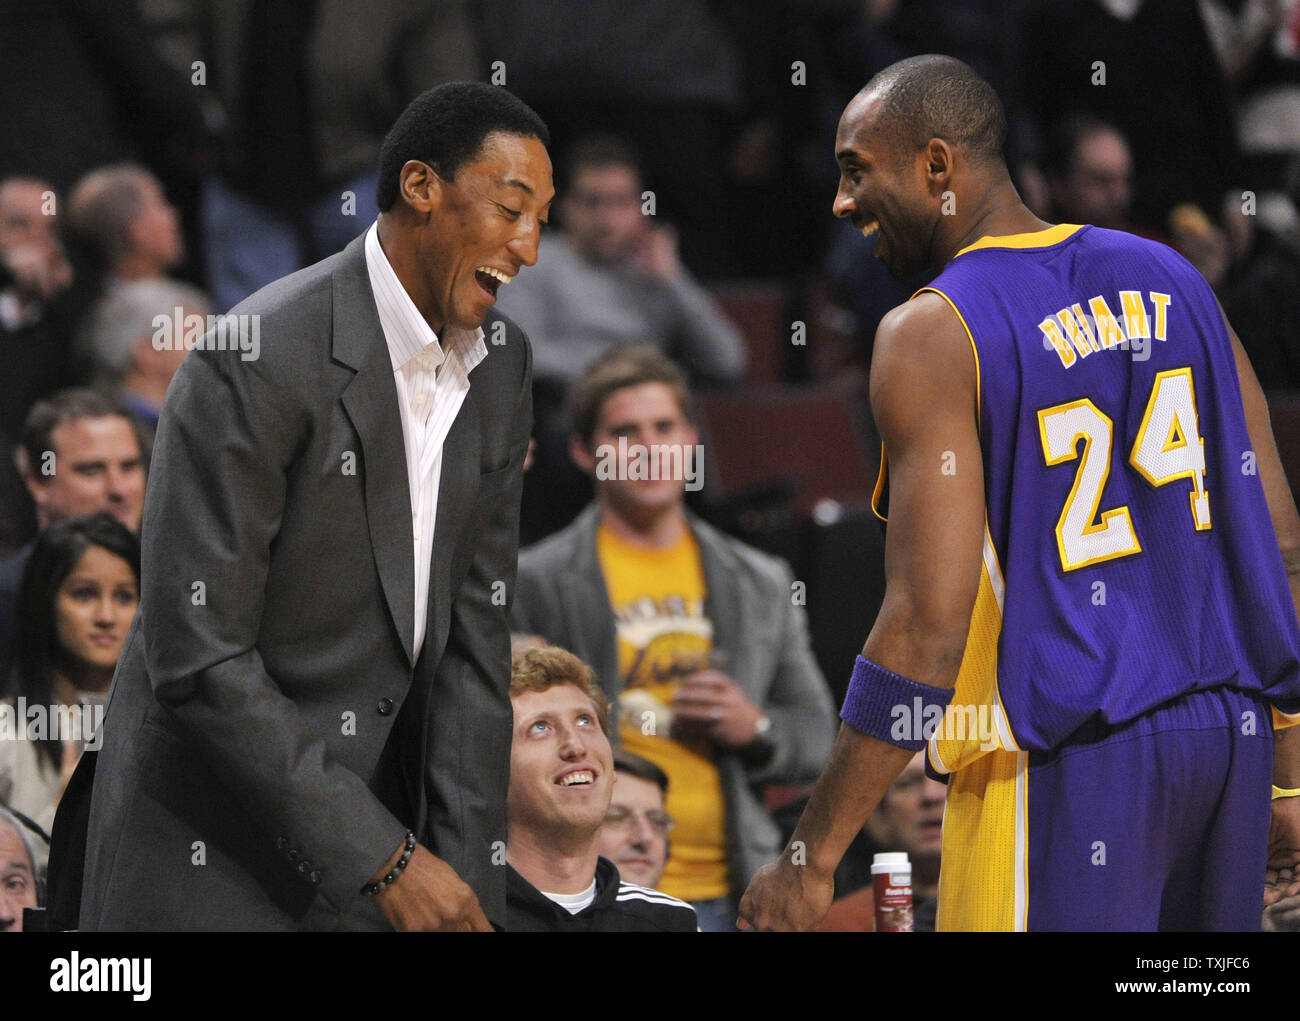 Former Chicago Bulls Hall of Famer Scottie Pippen (L) jokes around with Los Angeles Lakers guard Kobe Bryant during the first quarter at the United Center in Chicago on December 10, 2010.   UPI/Brian Kersey Stock Photo